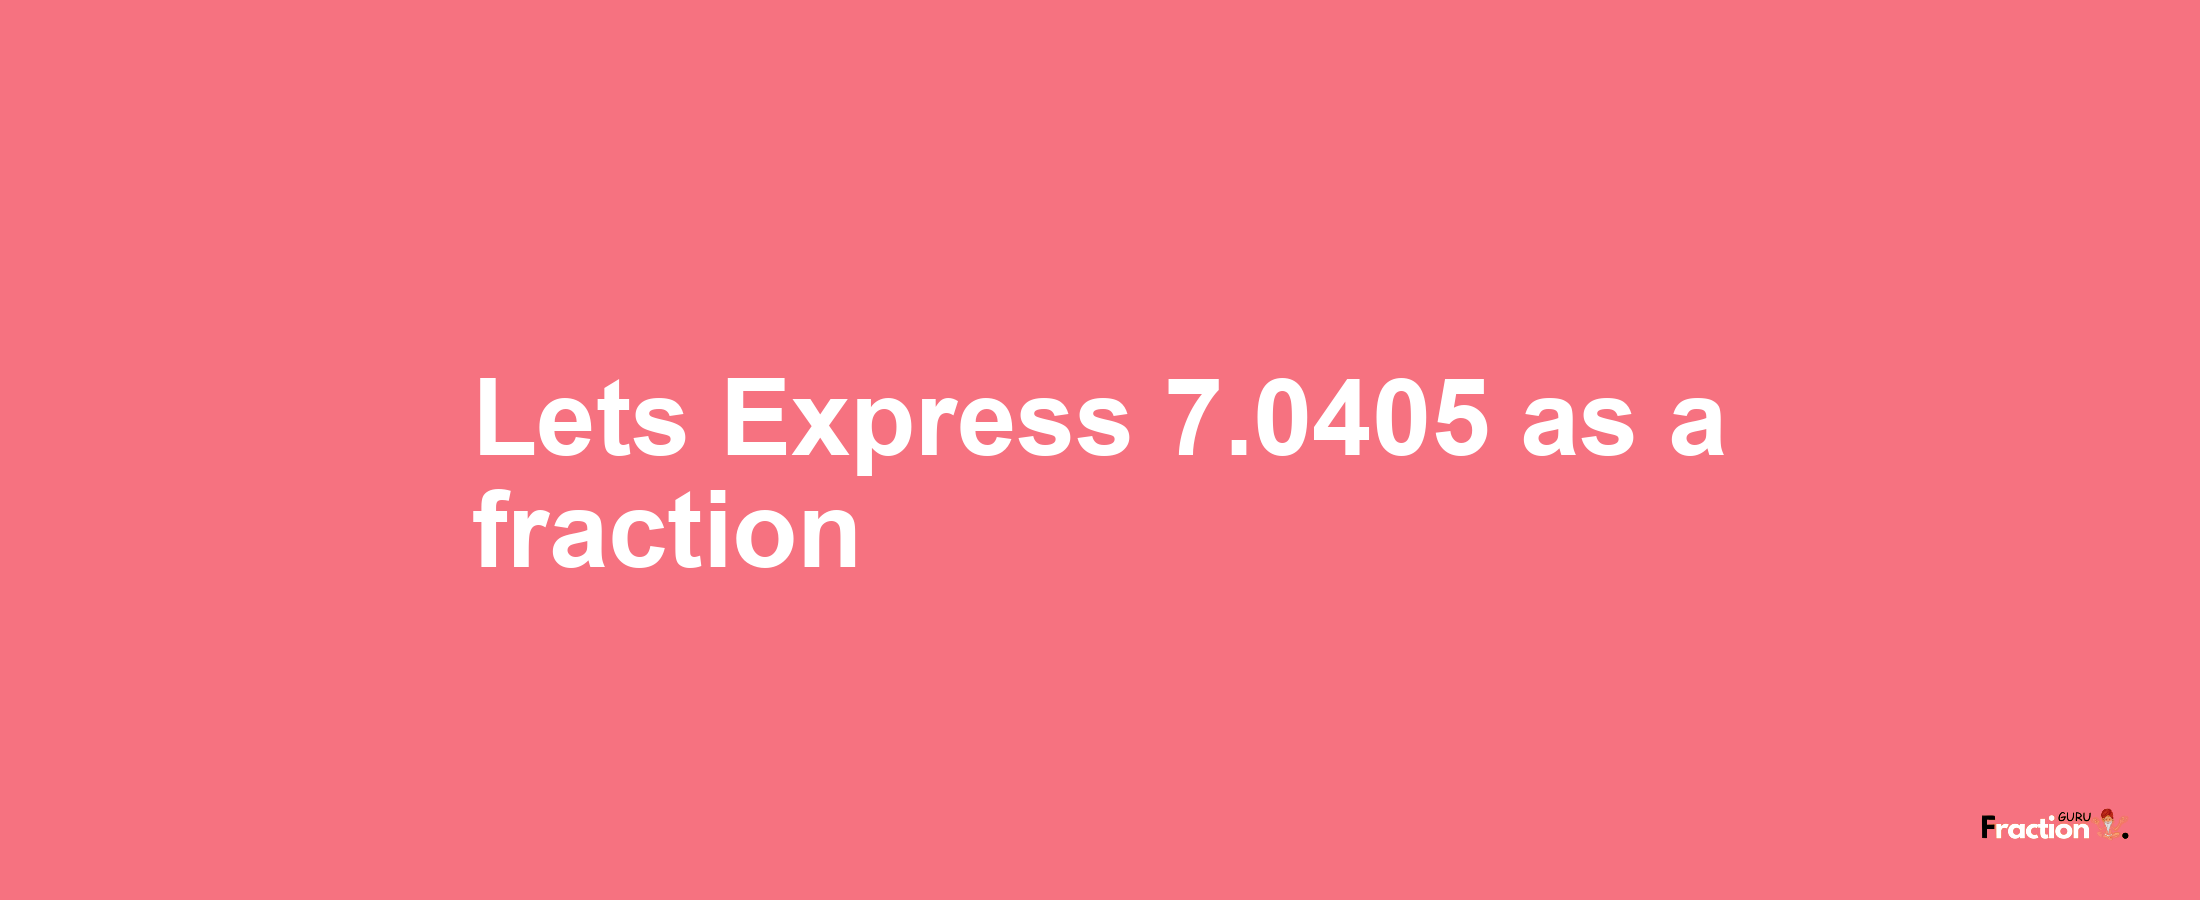 Lets Express 7.0405 as afraction